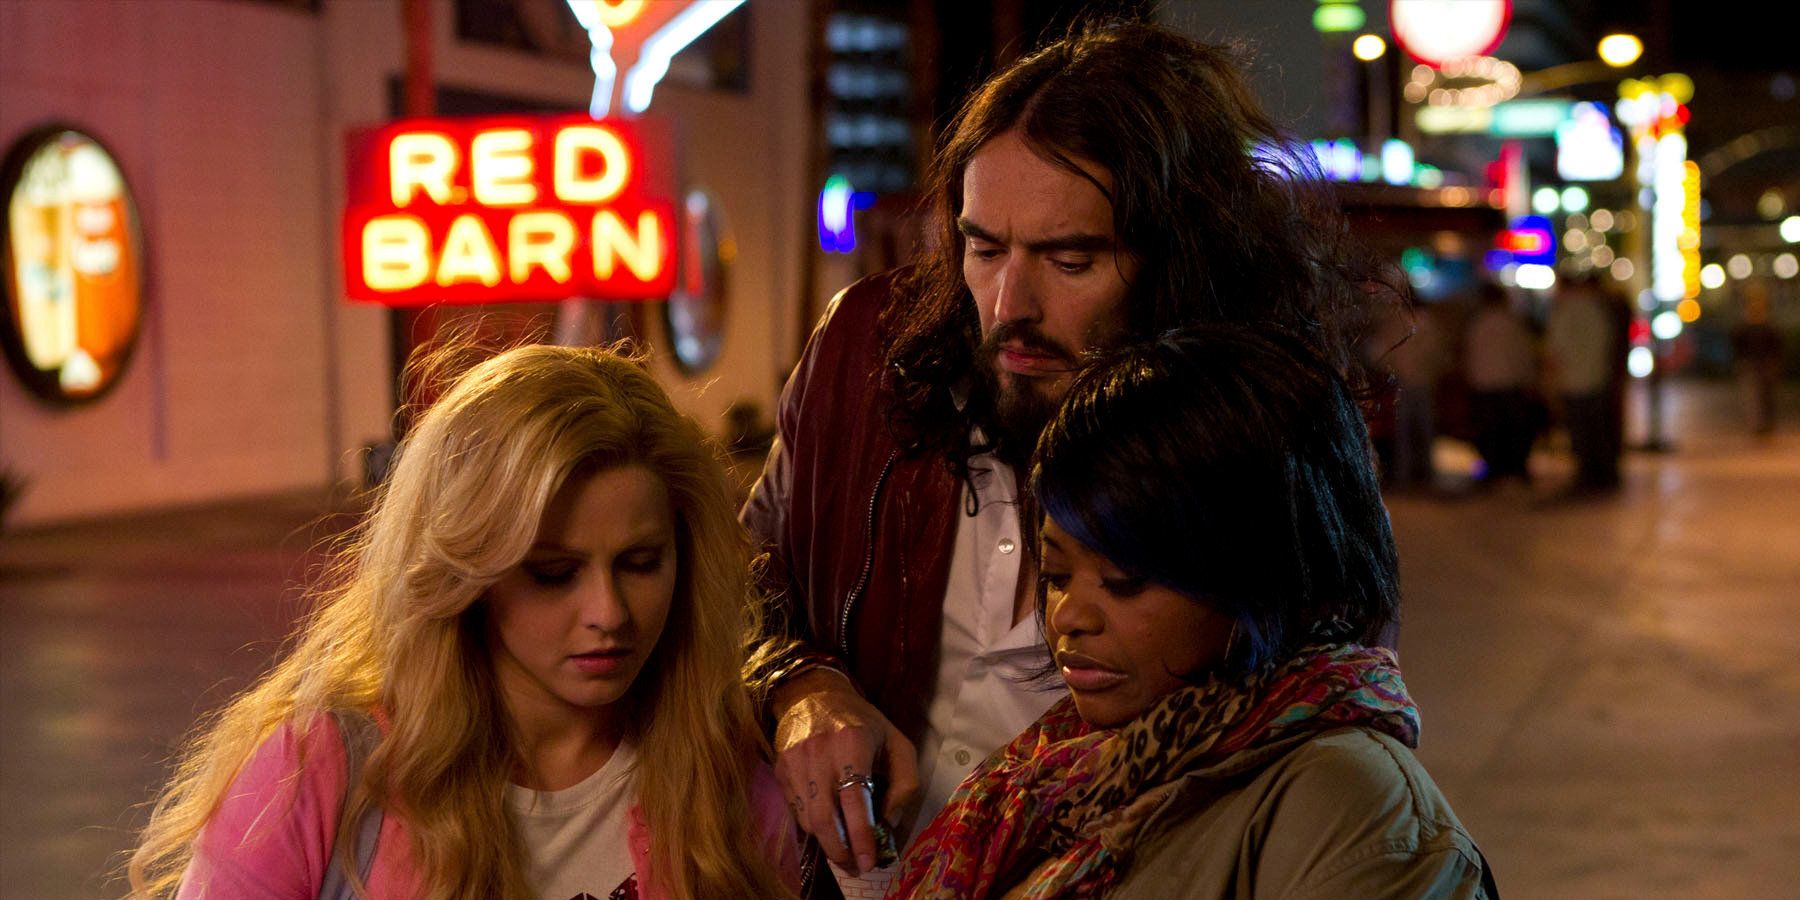 A still from the film Paradise (2013) featuring a trio of friends (including Russell Brand and Octavia Spencer) looking down at a note